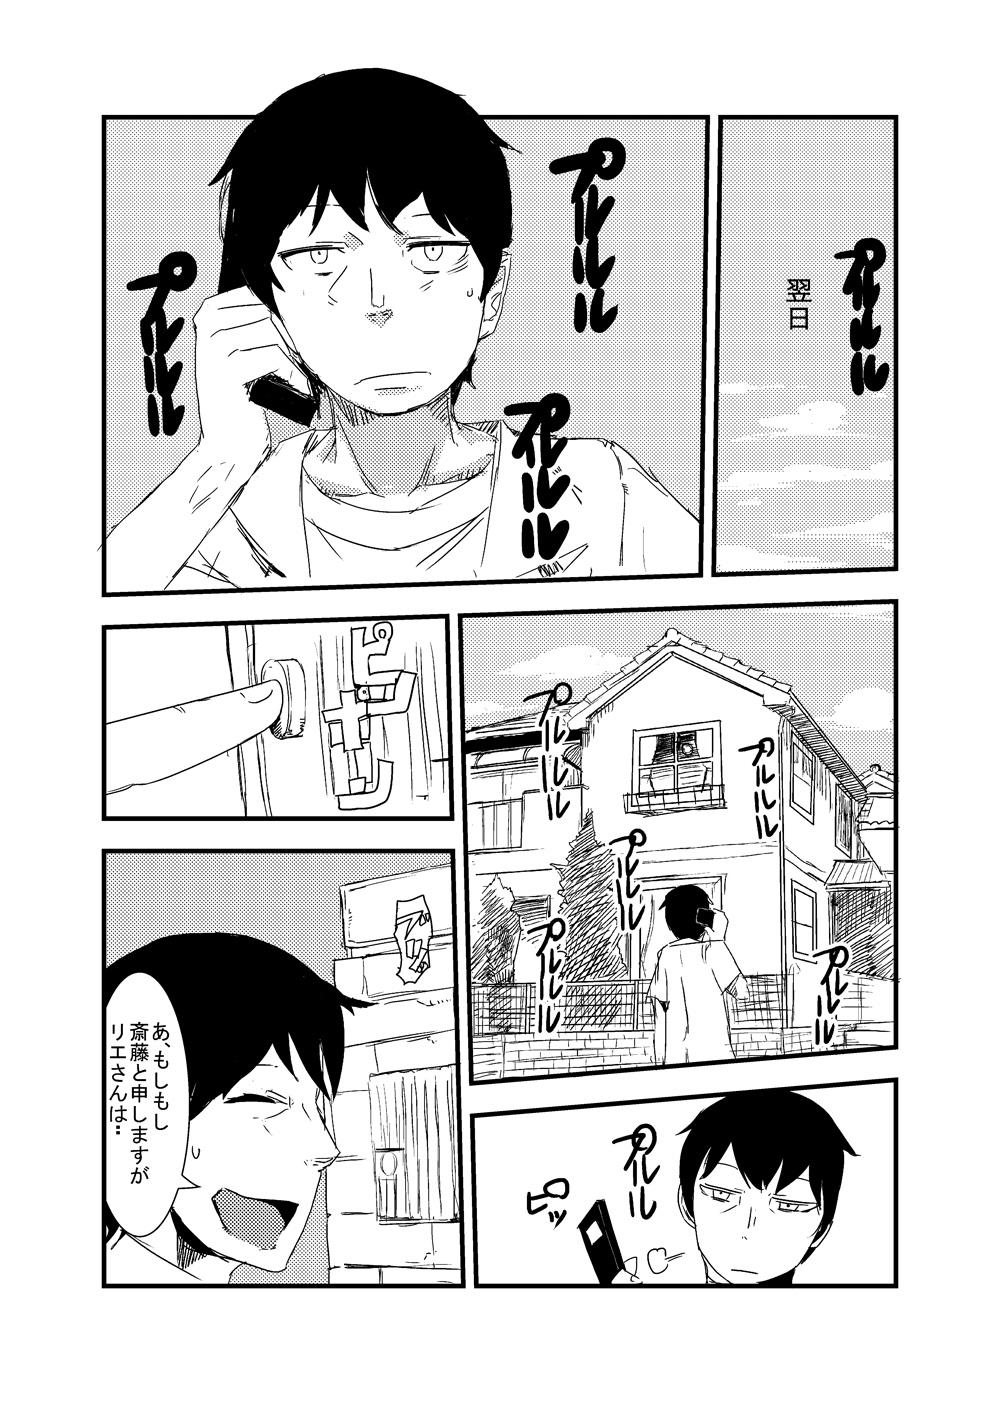 Family Kanojo no Henshin - ATTACK OF THE MONSTER GIRL Boys - Page 7